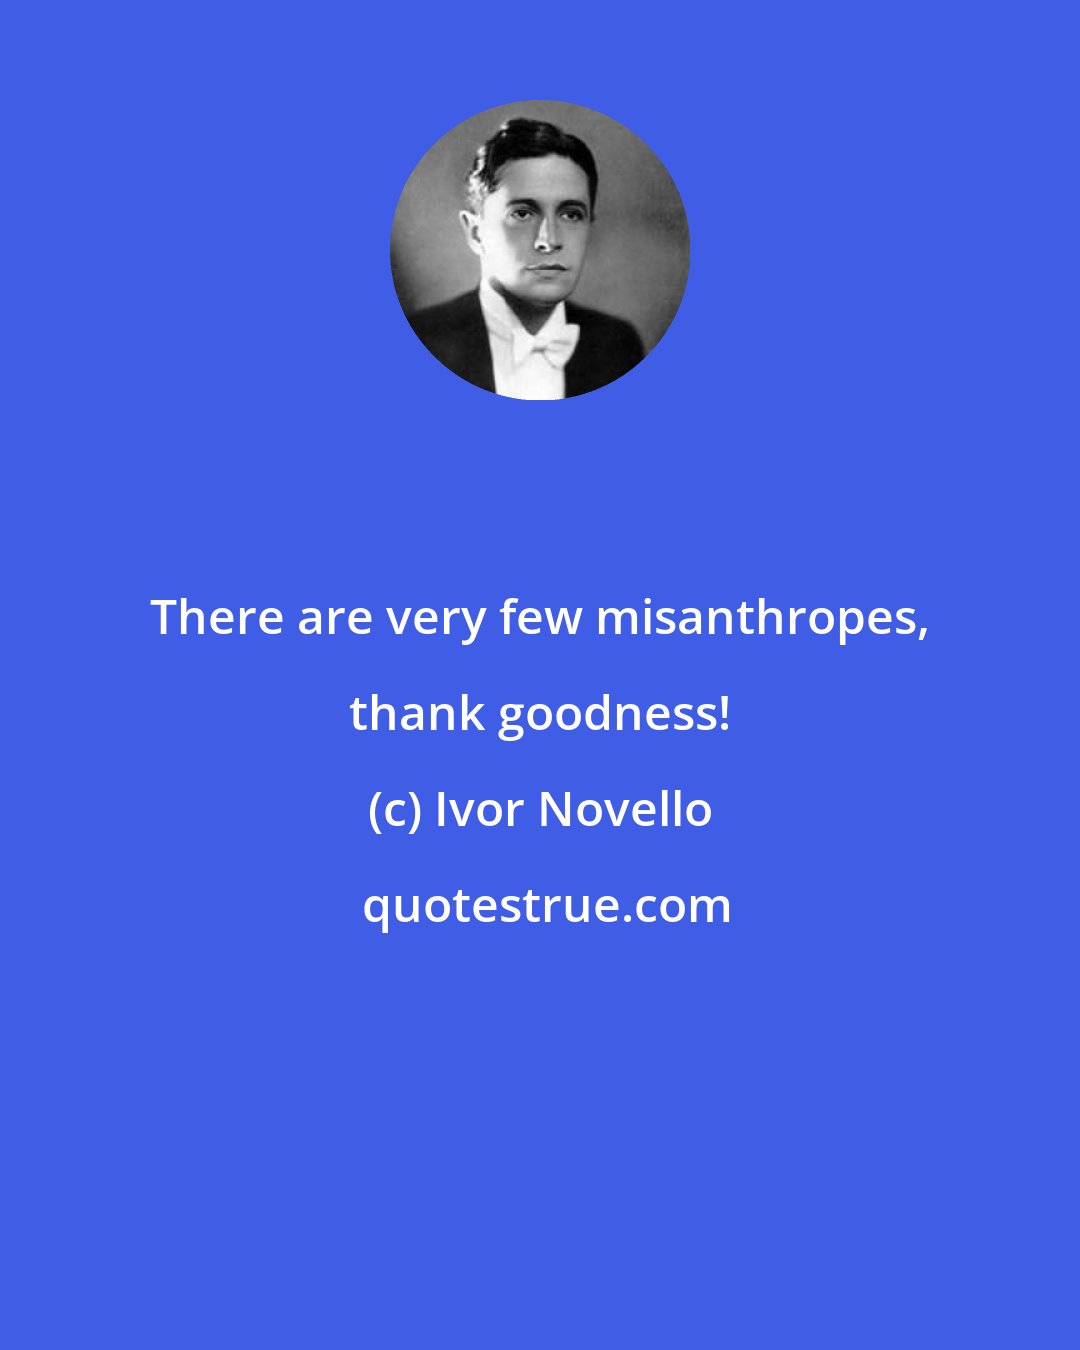 Ivor Novello: There are very few misanthropes, thank goodness!